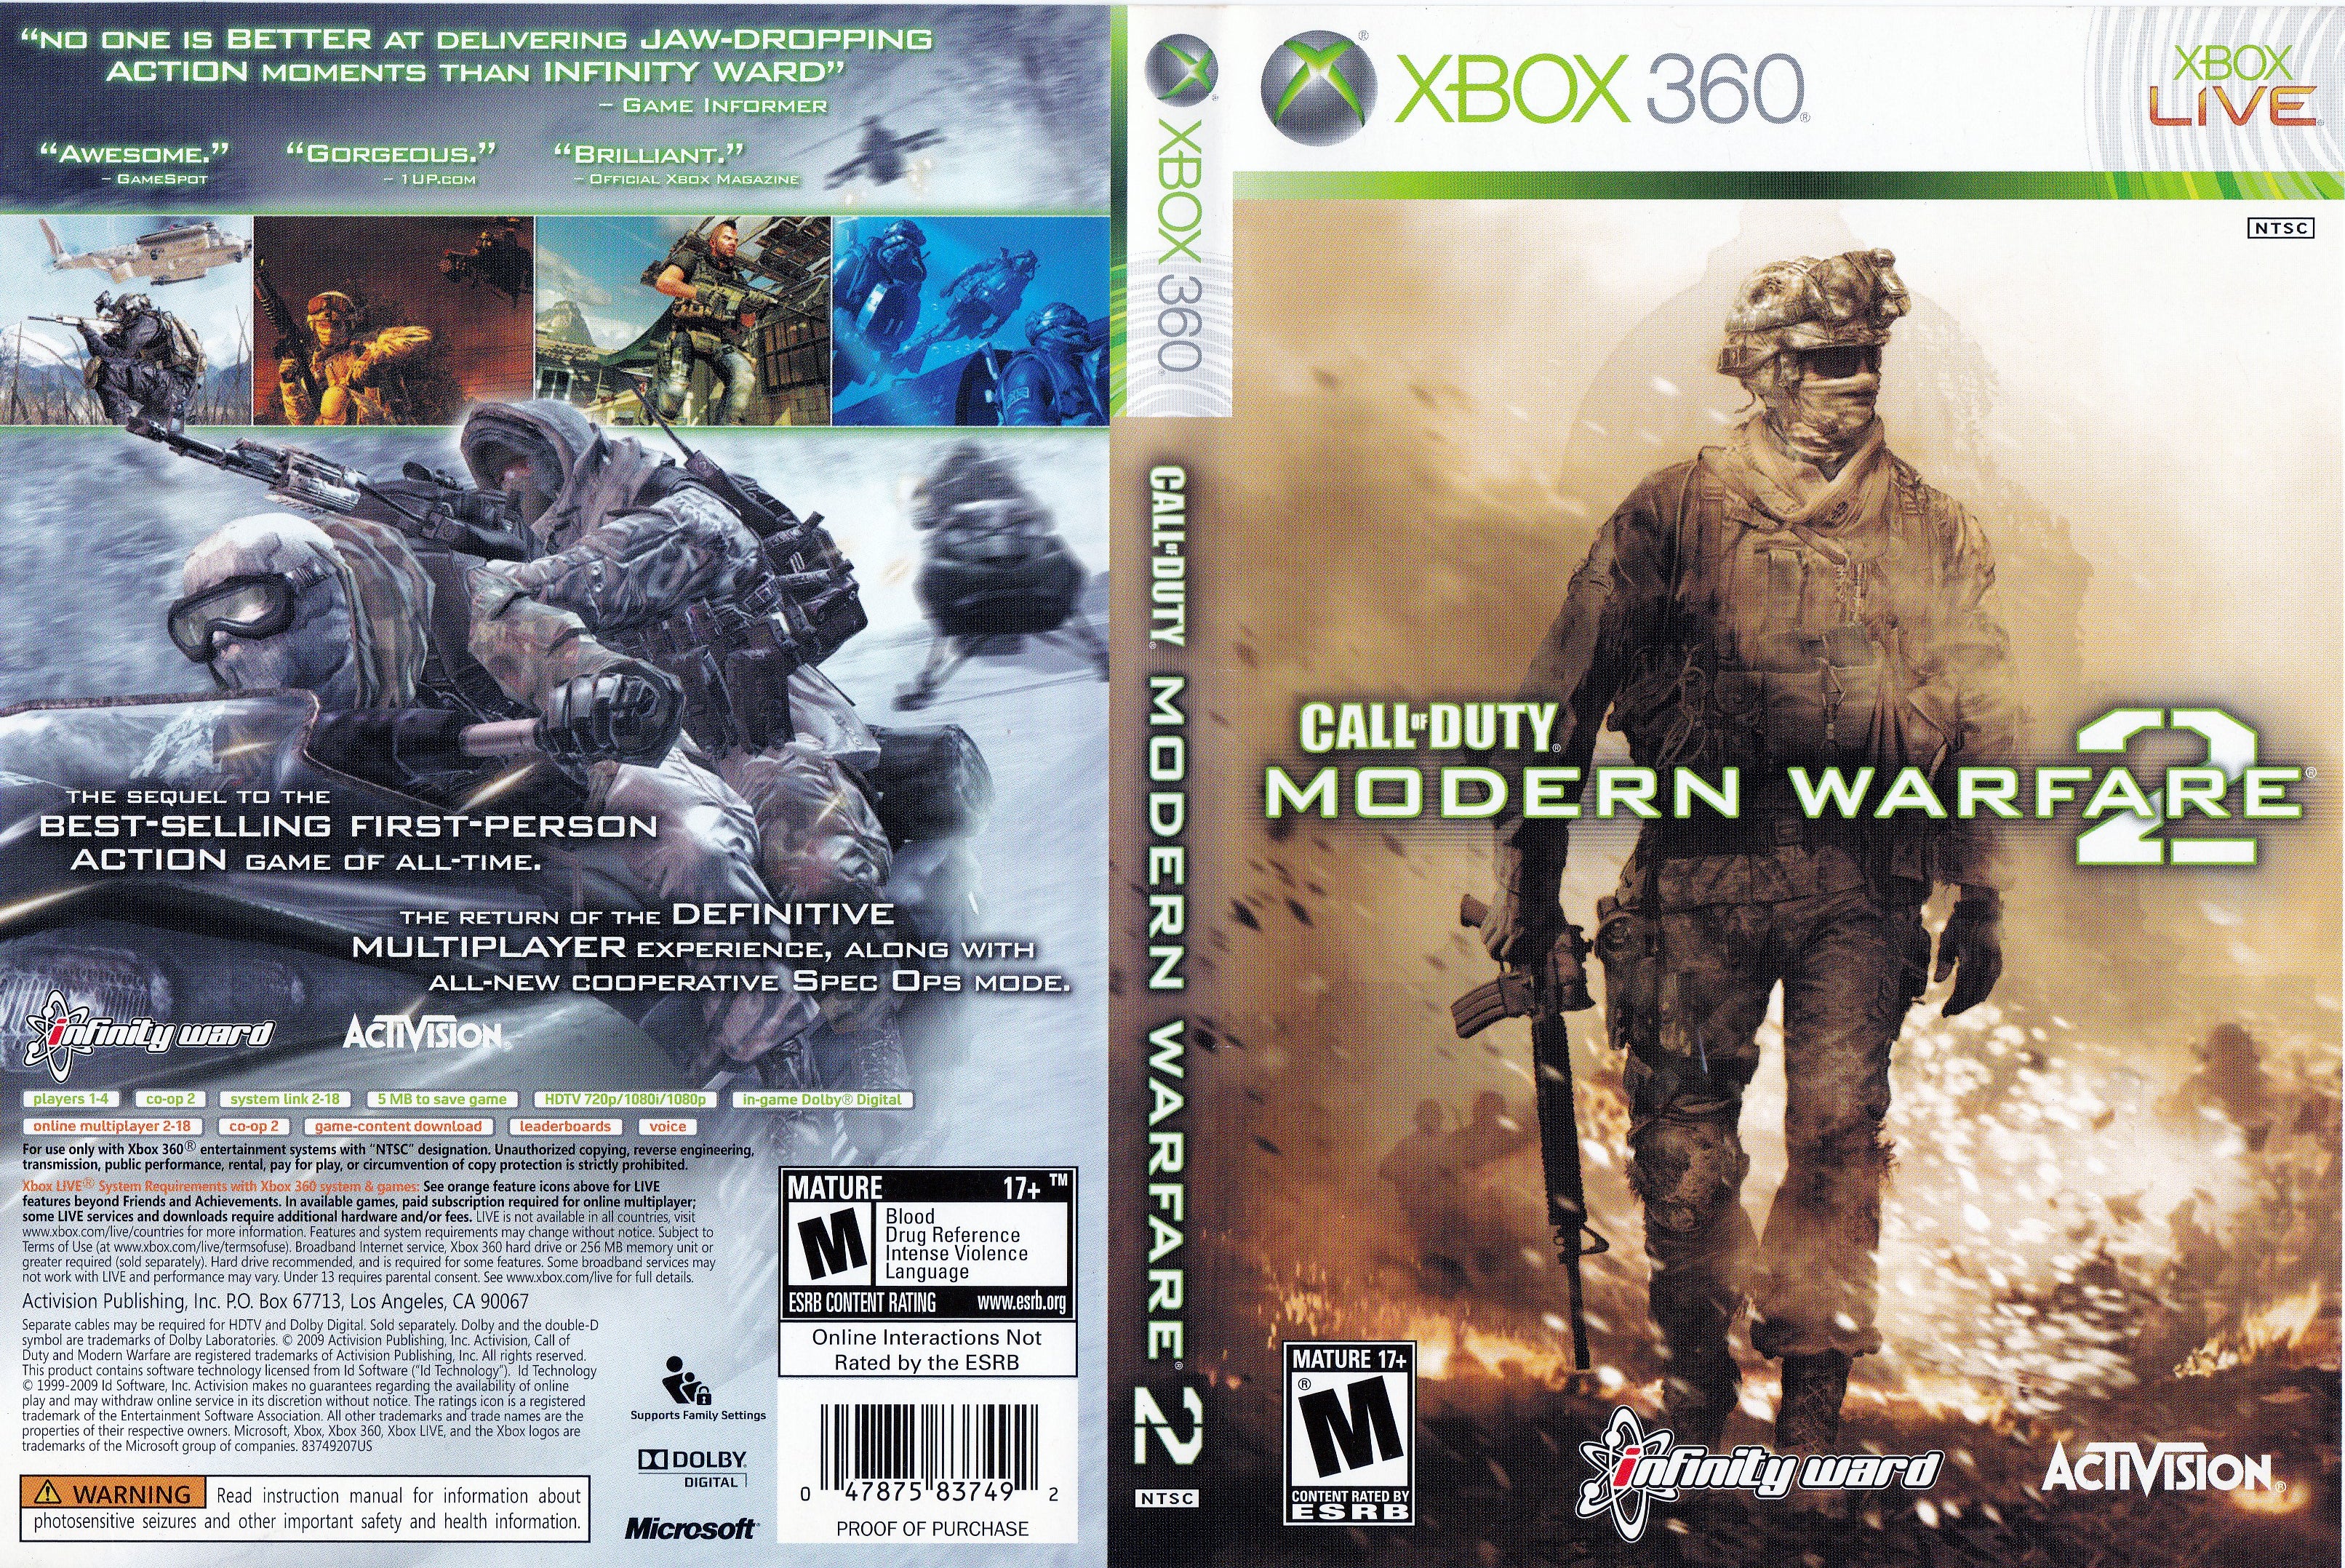 Call of Duty Modern Warfare 2 File and Download Size - PC, Xbox